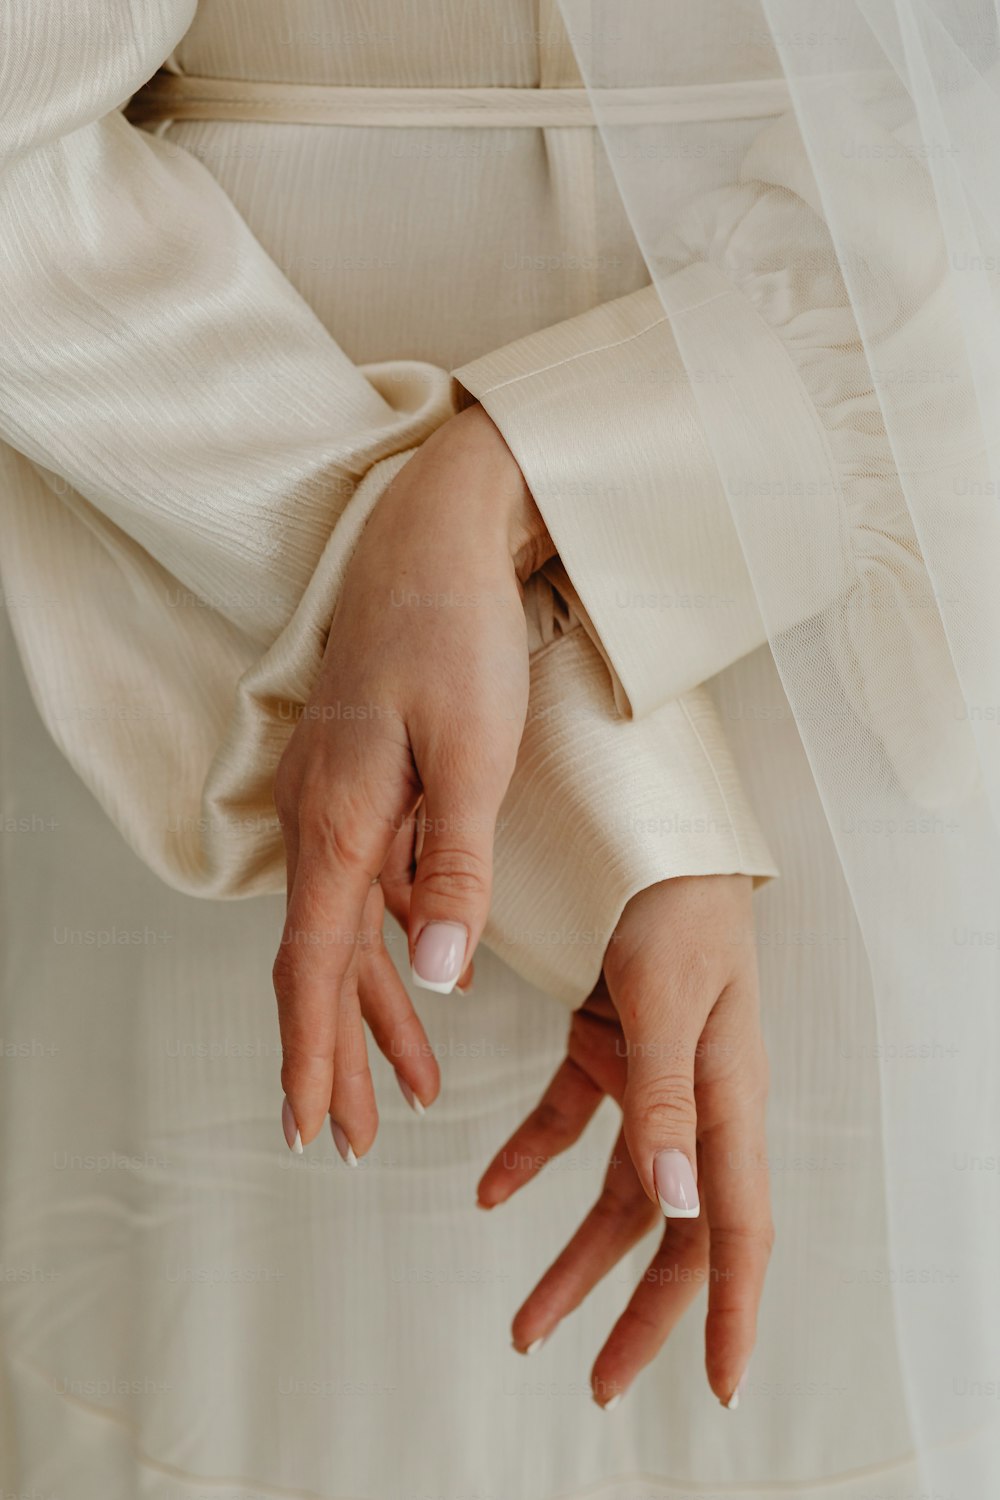 a close up of a person's hands wearing a wedding dress